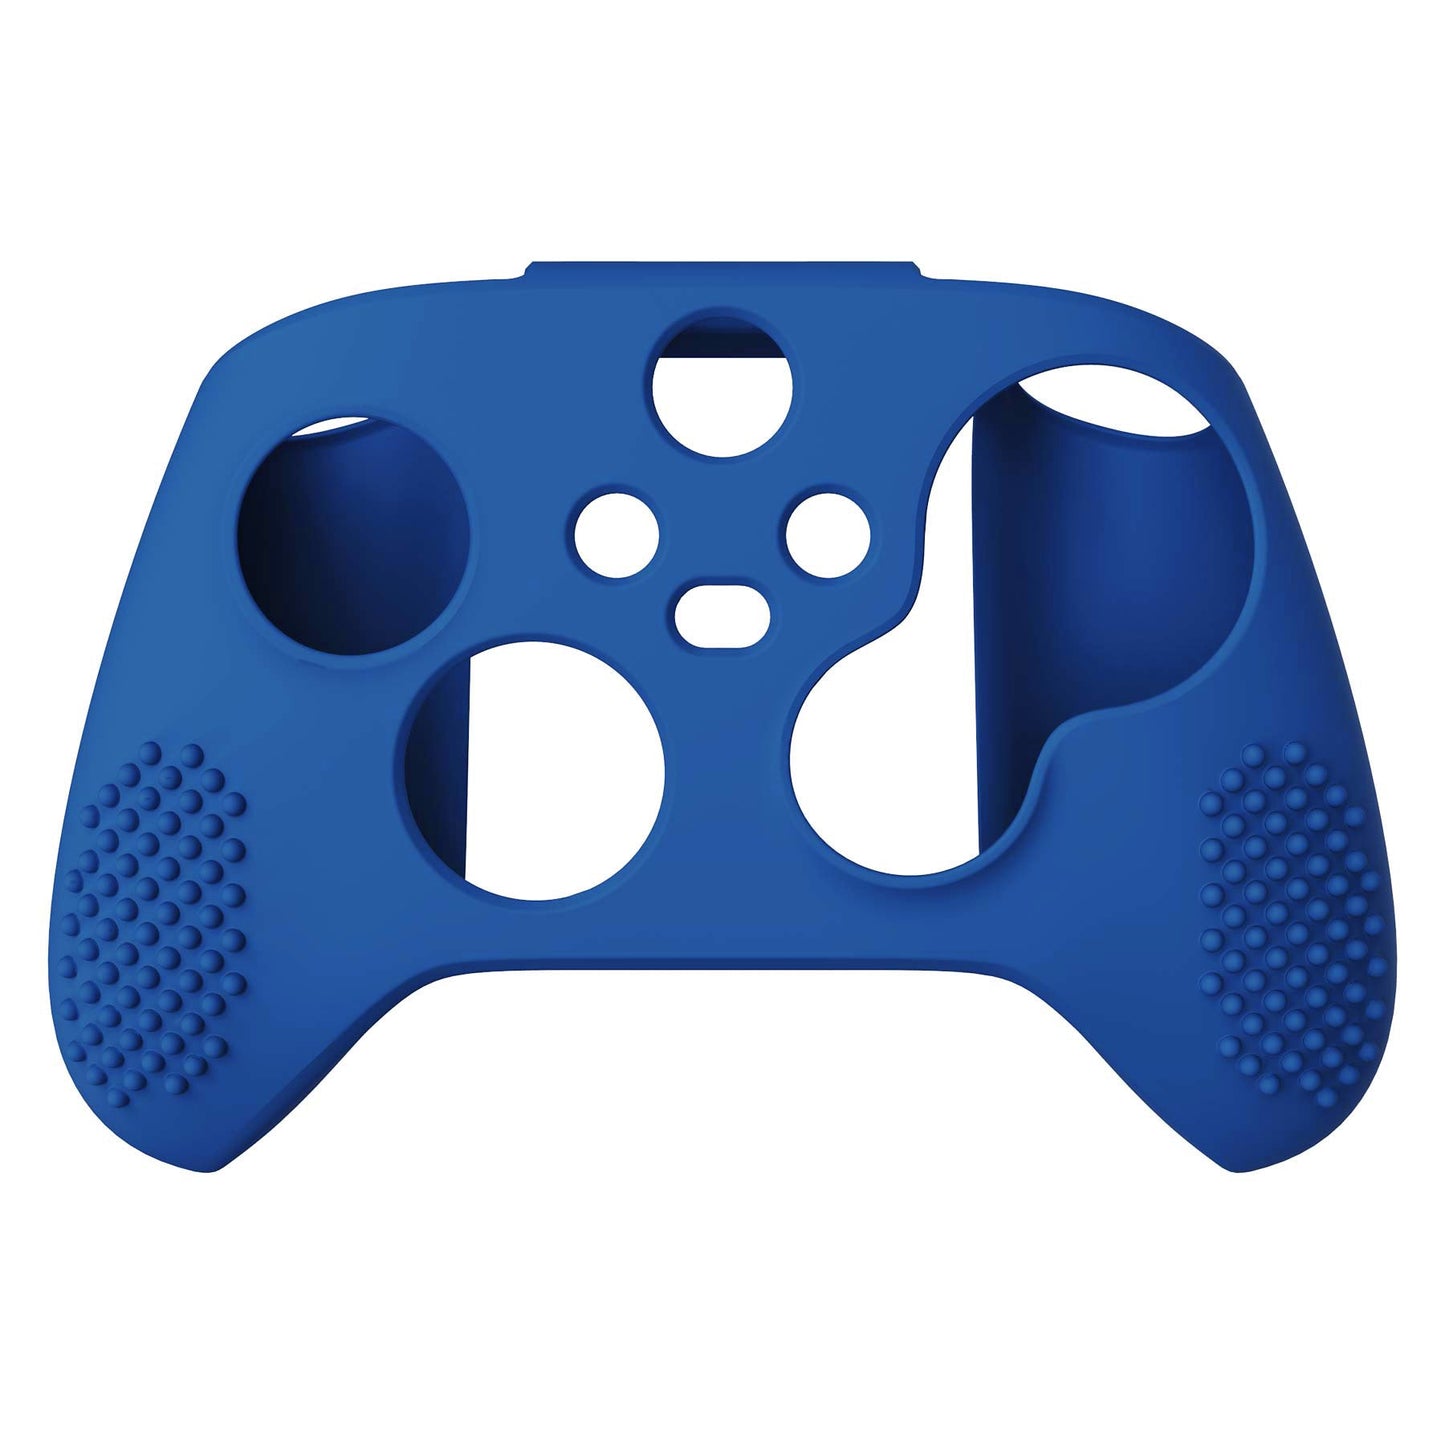 PlayVital Blue 3D Studded Edition Anti-slip Silicone Cover Skin for Xbox Series X Controller, Soft Rubber Case Protector for Xbox Series S Controller with 6 Black Thumb Grip Caps - SDX3008 PlayVital